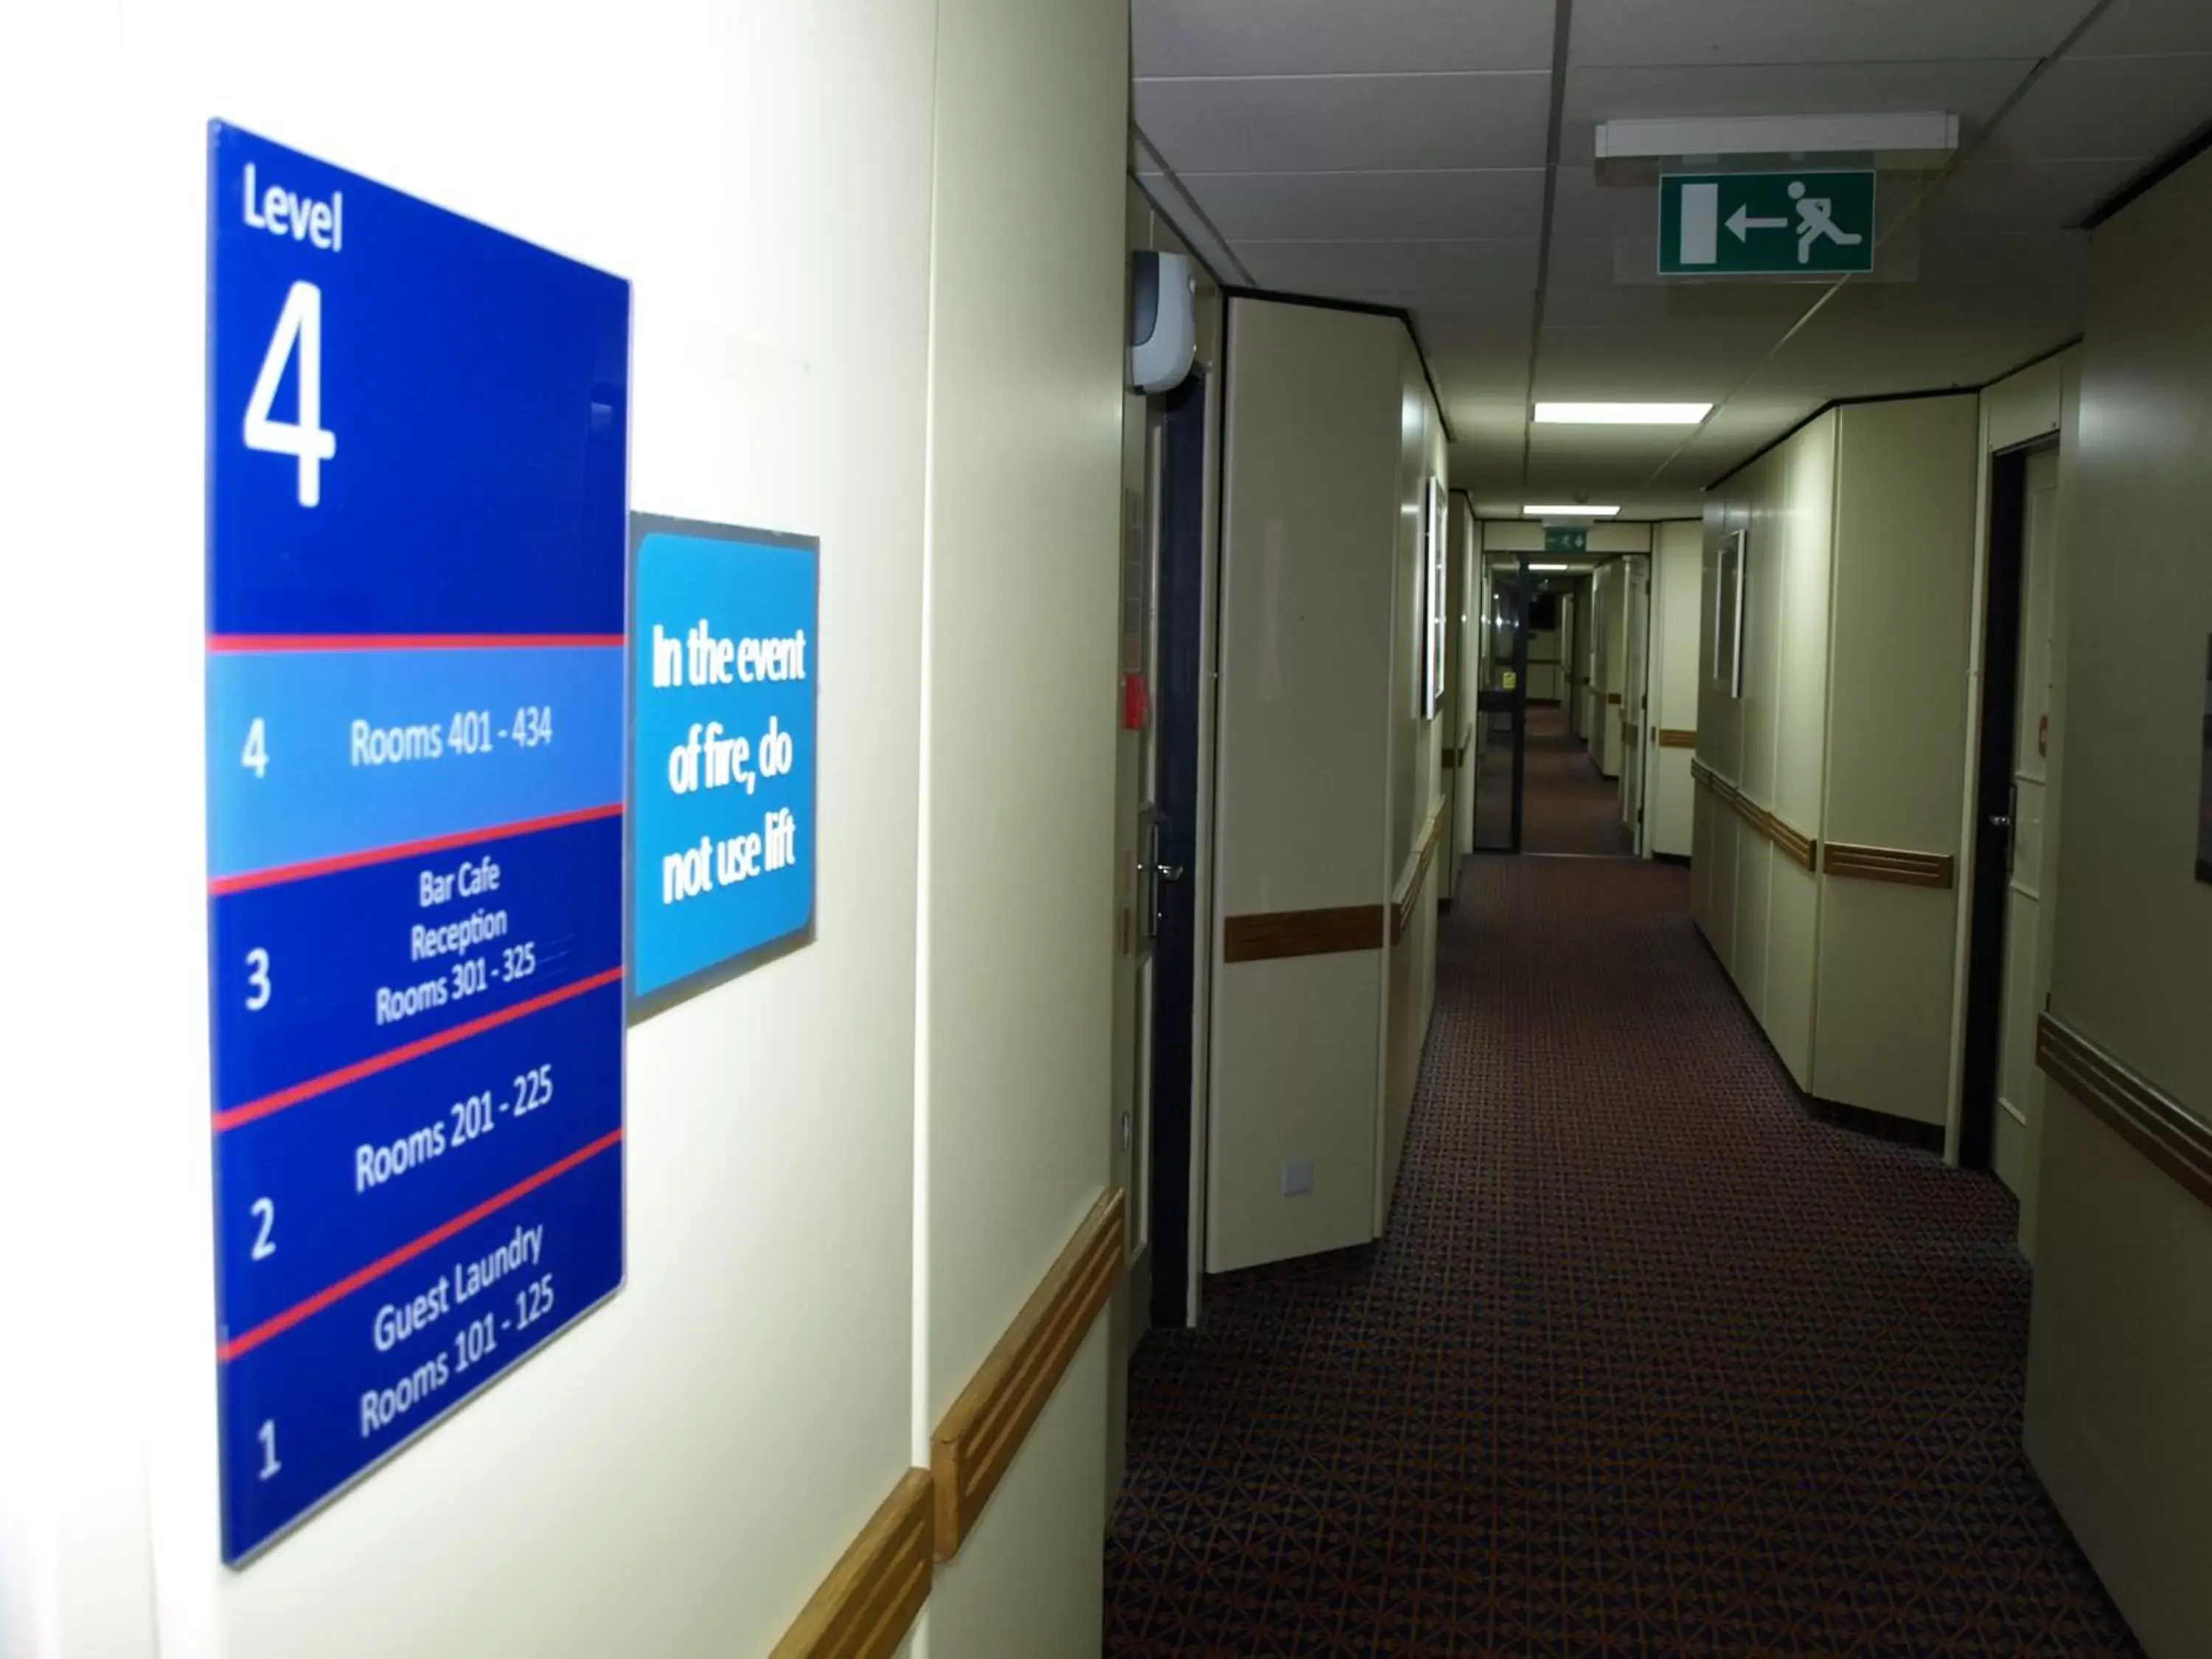 Area and facilities in 247Hotel.com